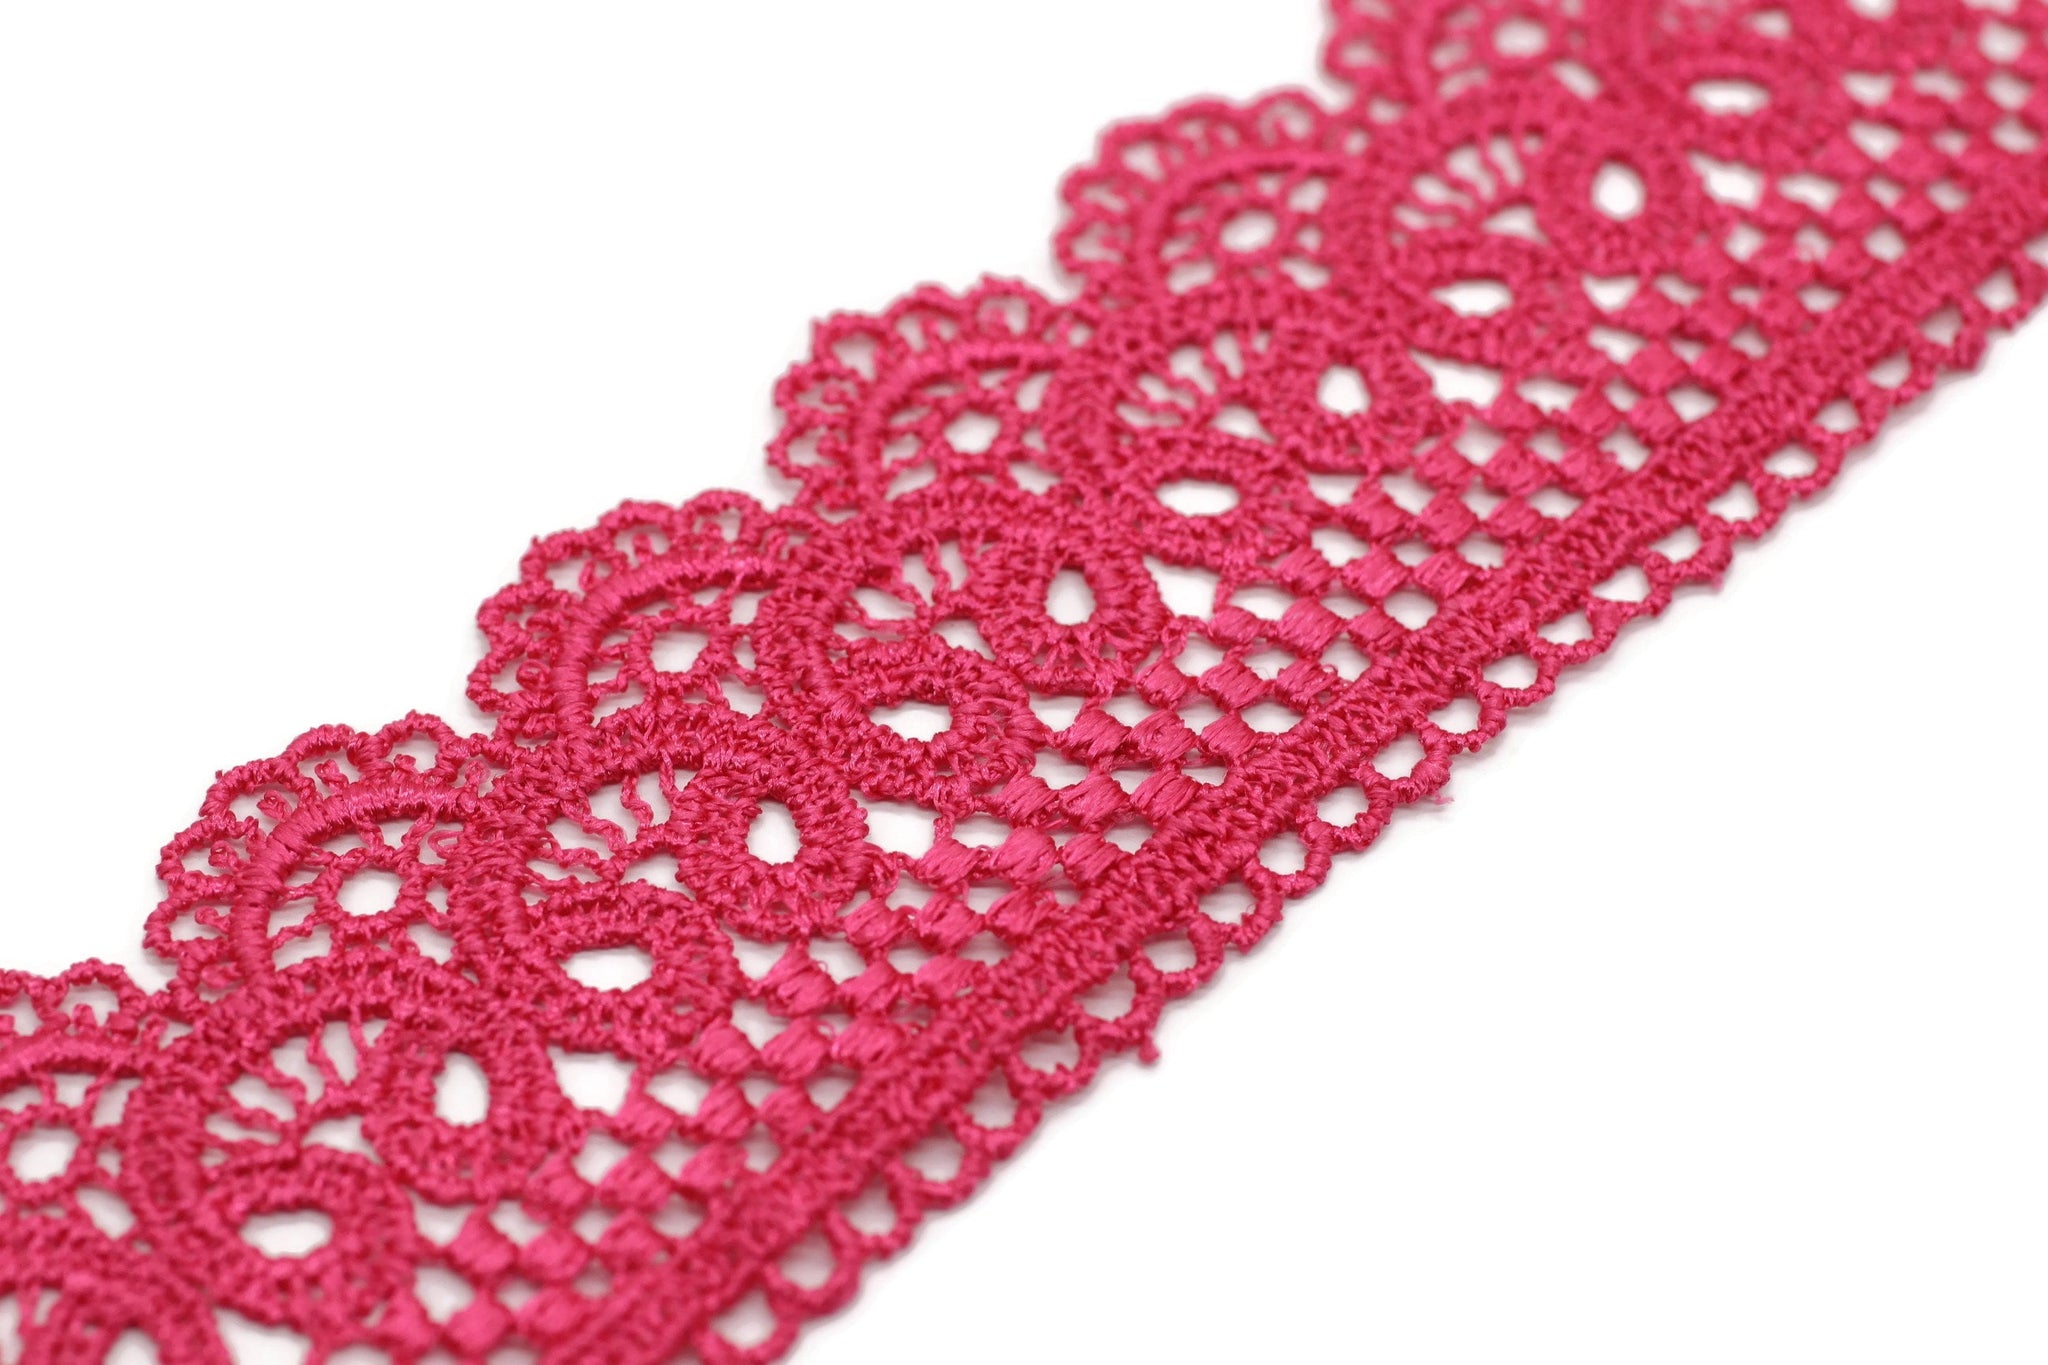 19.6 Yards Pink Bridal Guipure Lace Trim | 2.1 Inches Wide Lace Trim | Geometric Bridal Lace | French Guipure | Guipure Lace Fabric TRM53